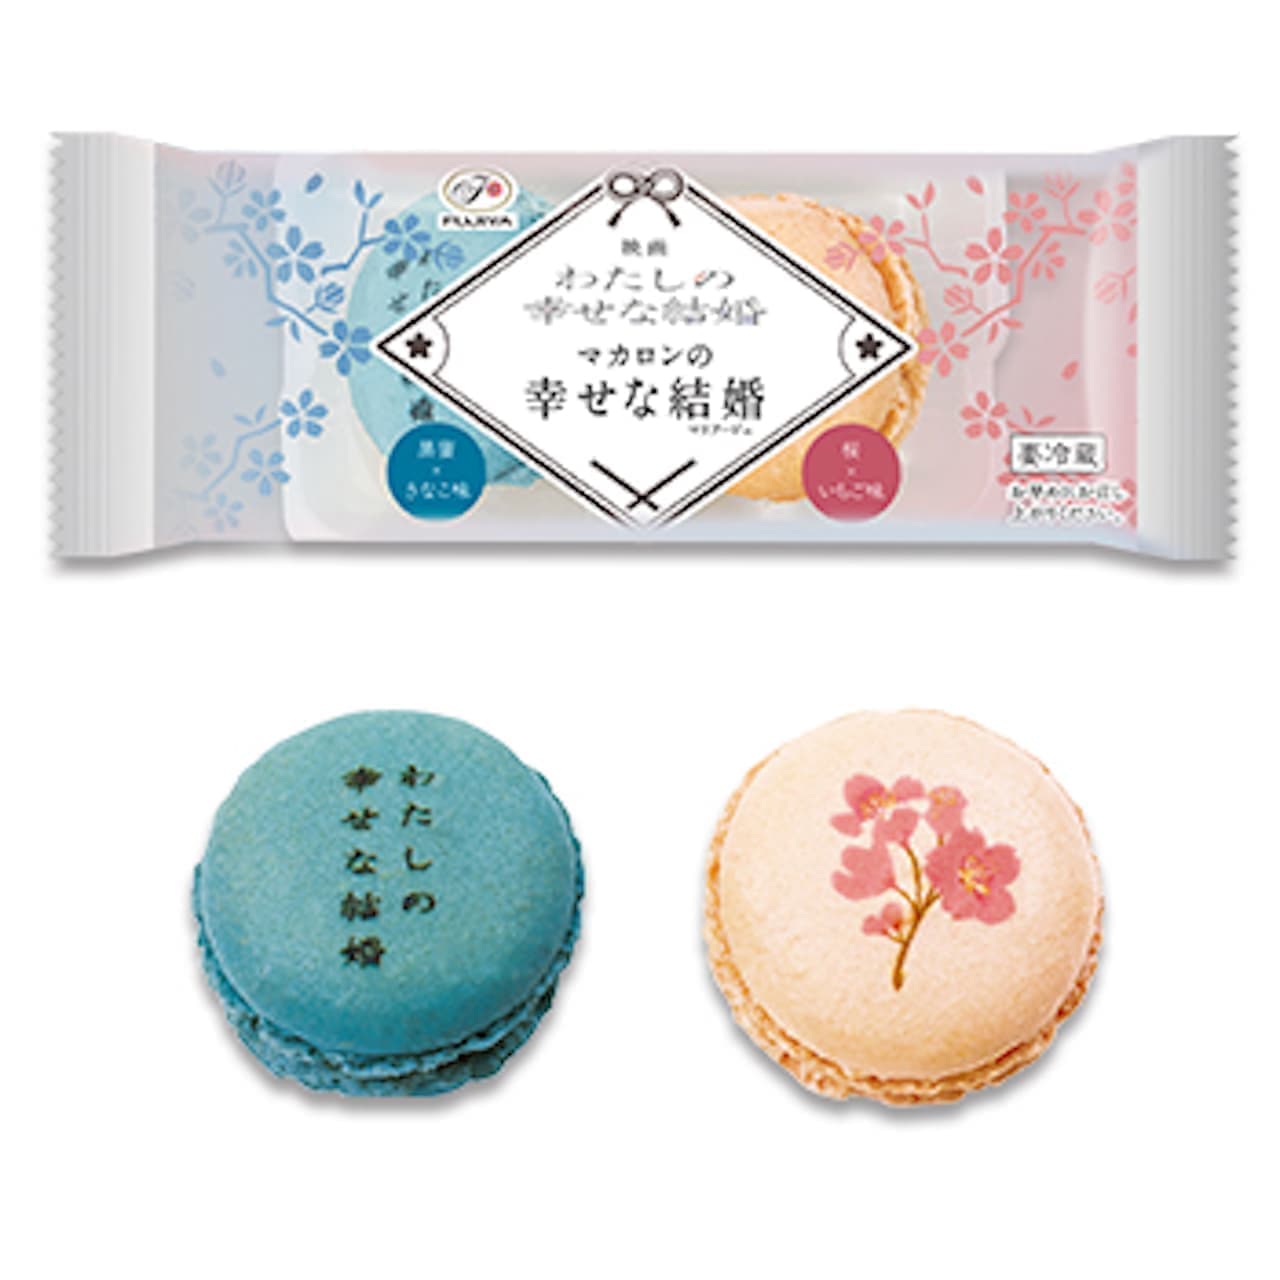 Fujiya "Happy Marriage (Marriage) of Macarons in the Movie "My Happy Marriage"".